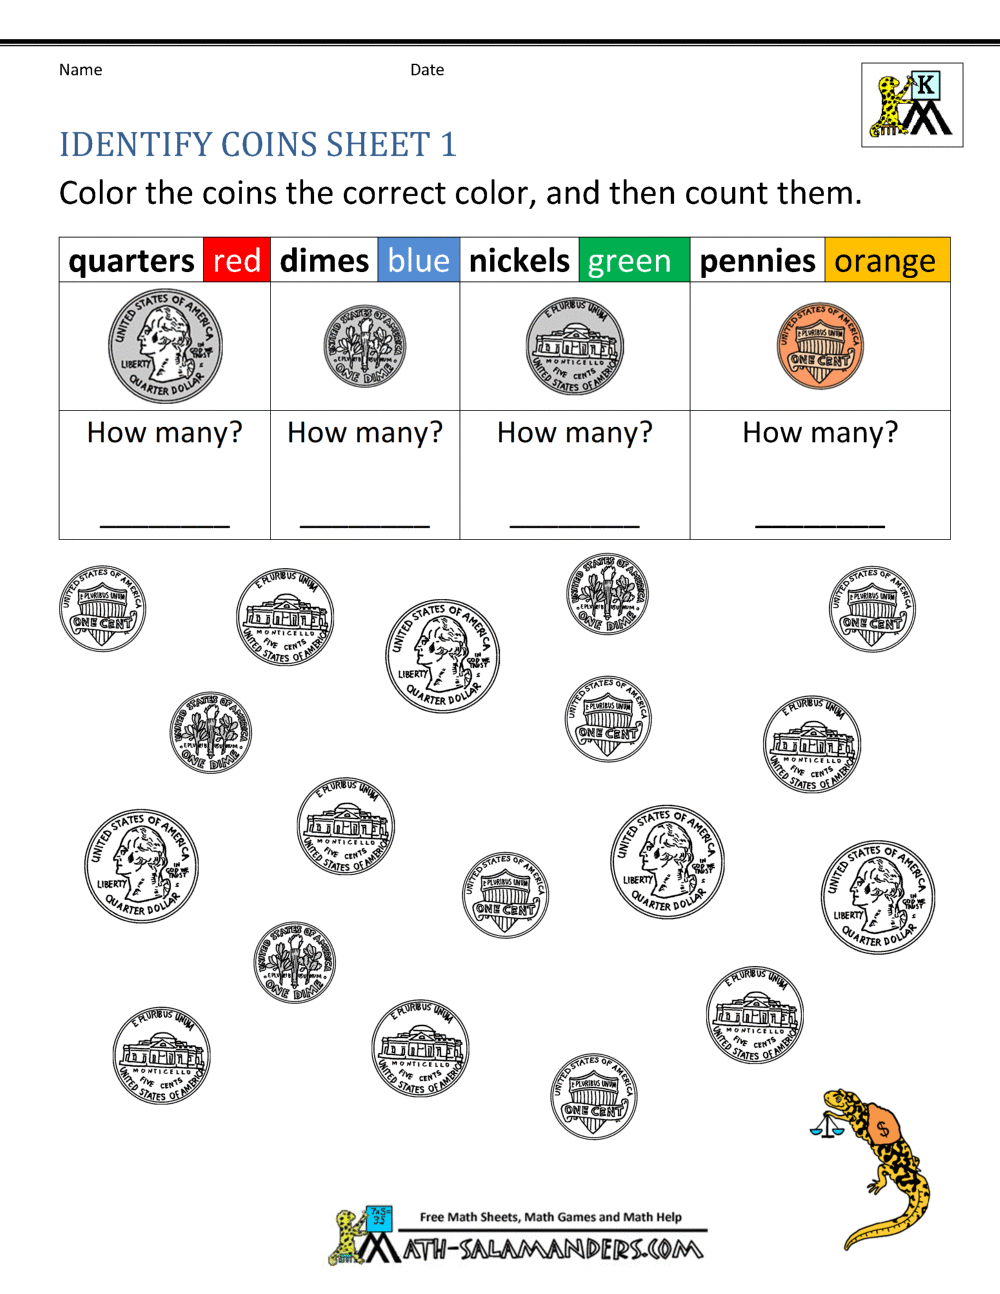 identify-coins-worksheets